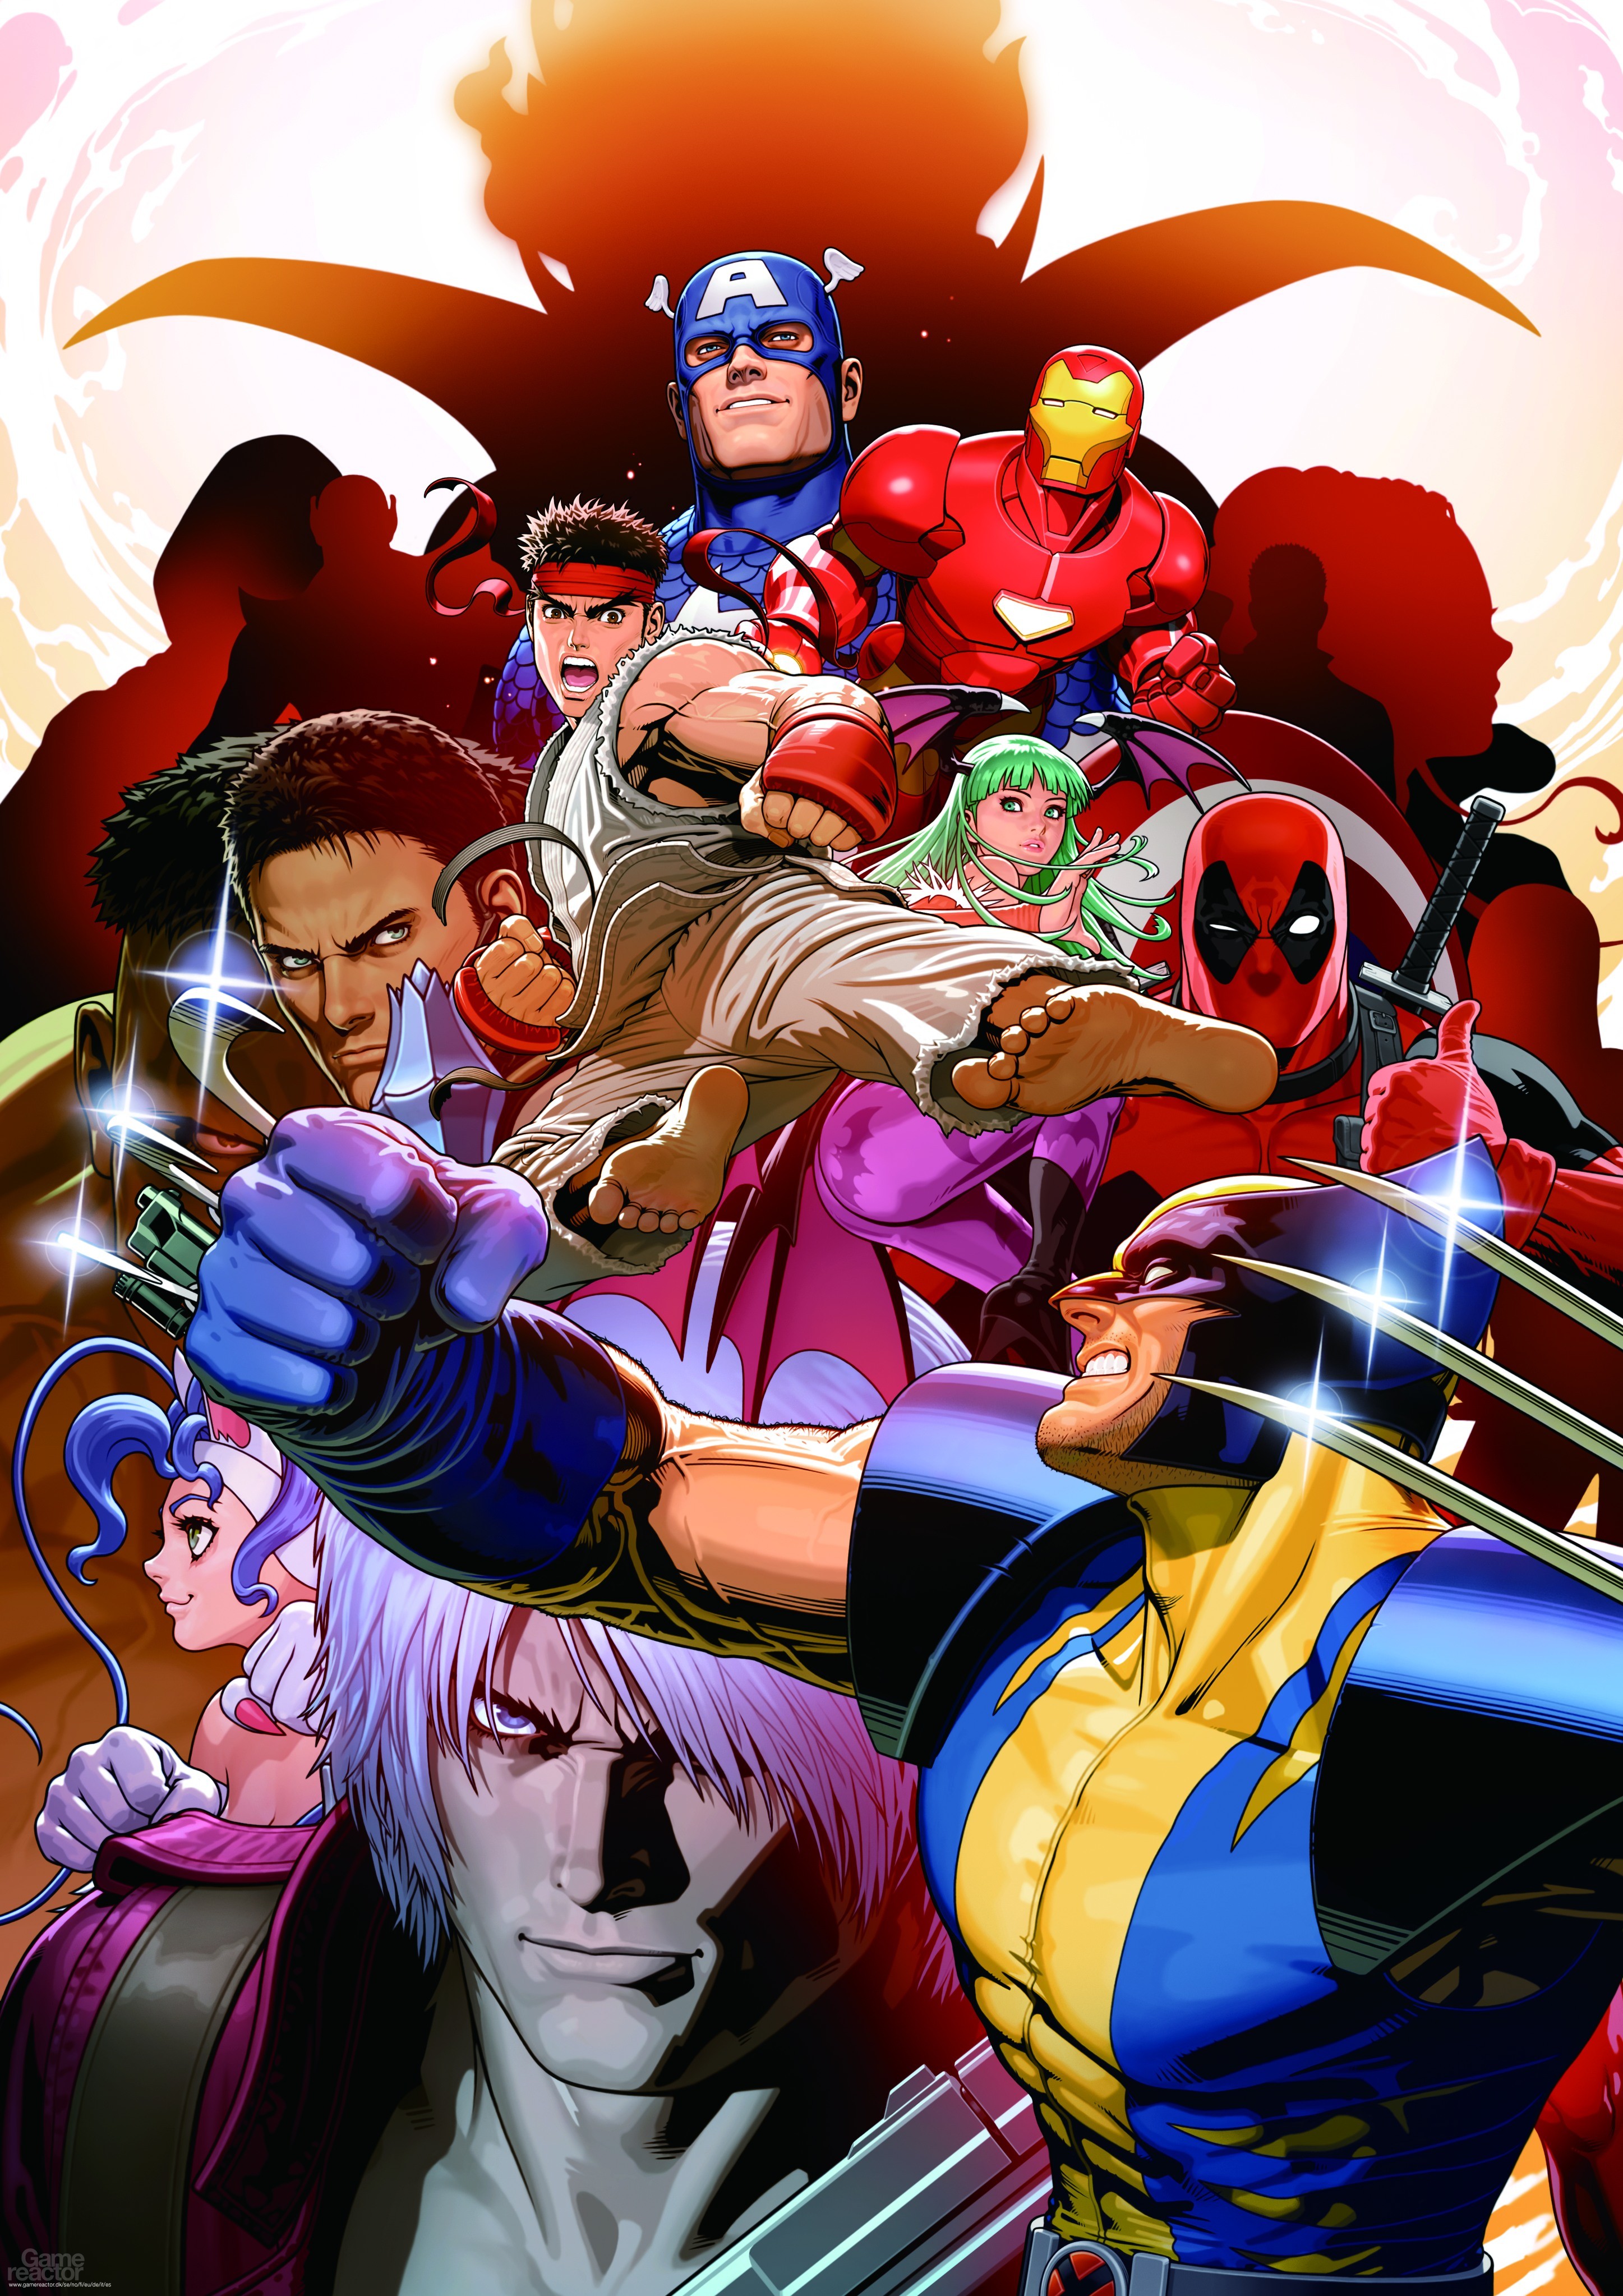 Marvel vs. Capcom 3: Fate of Two Worlds [1920x1080]